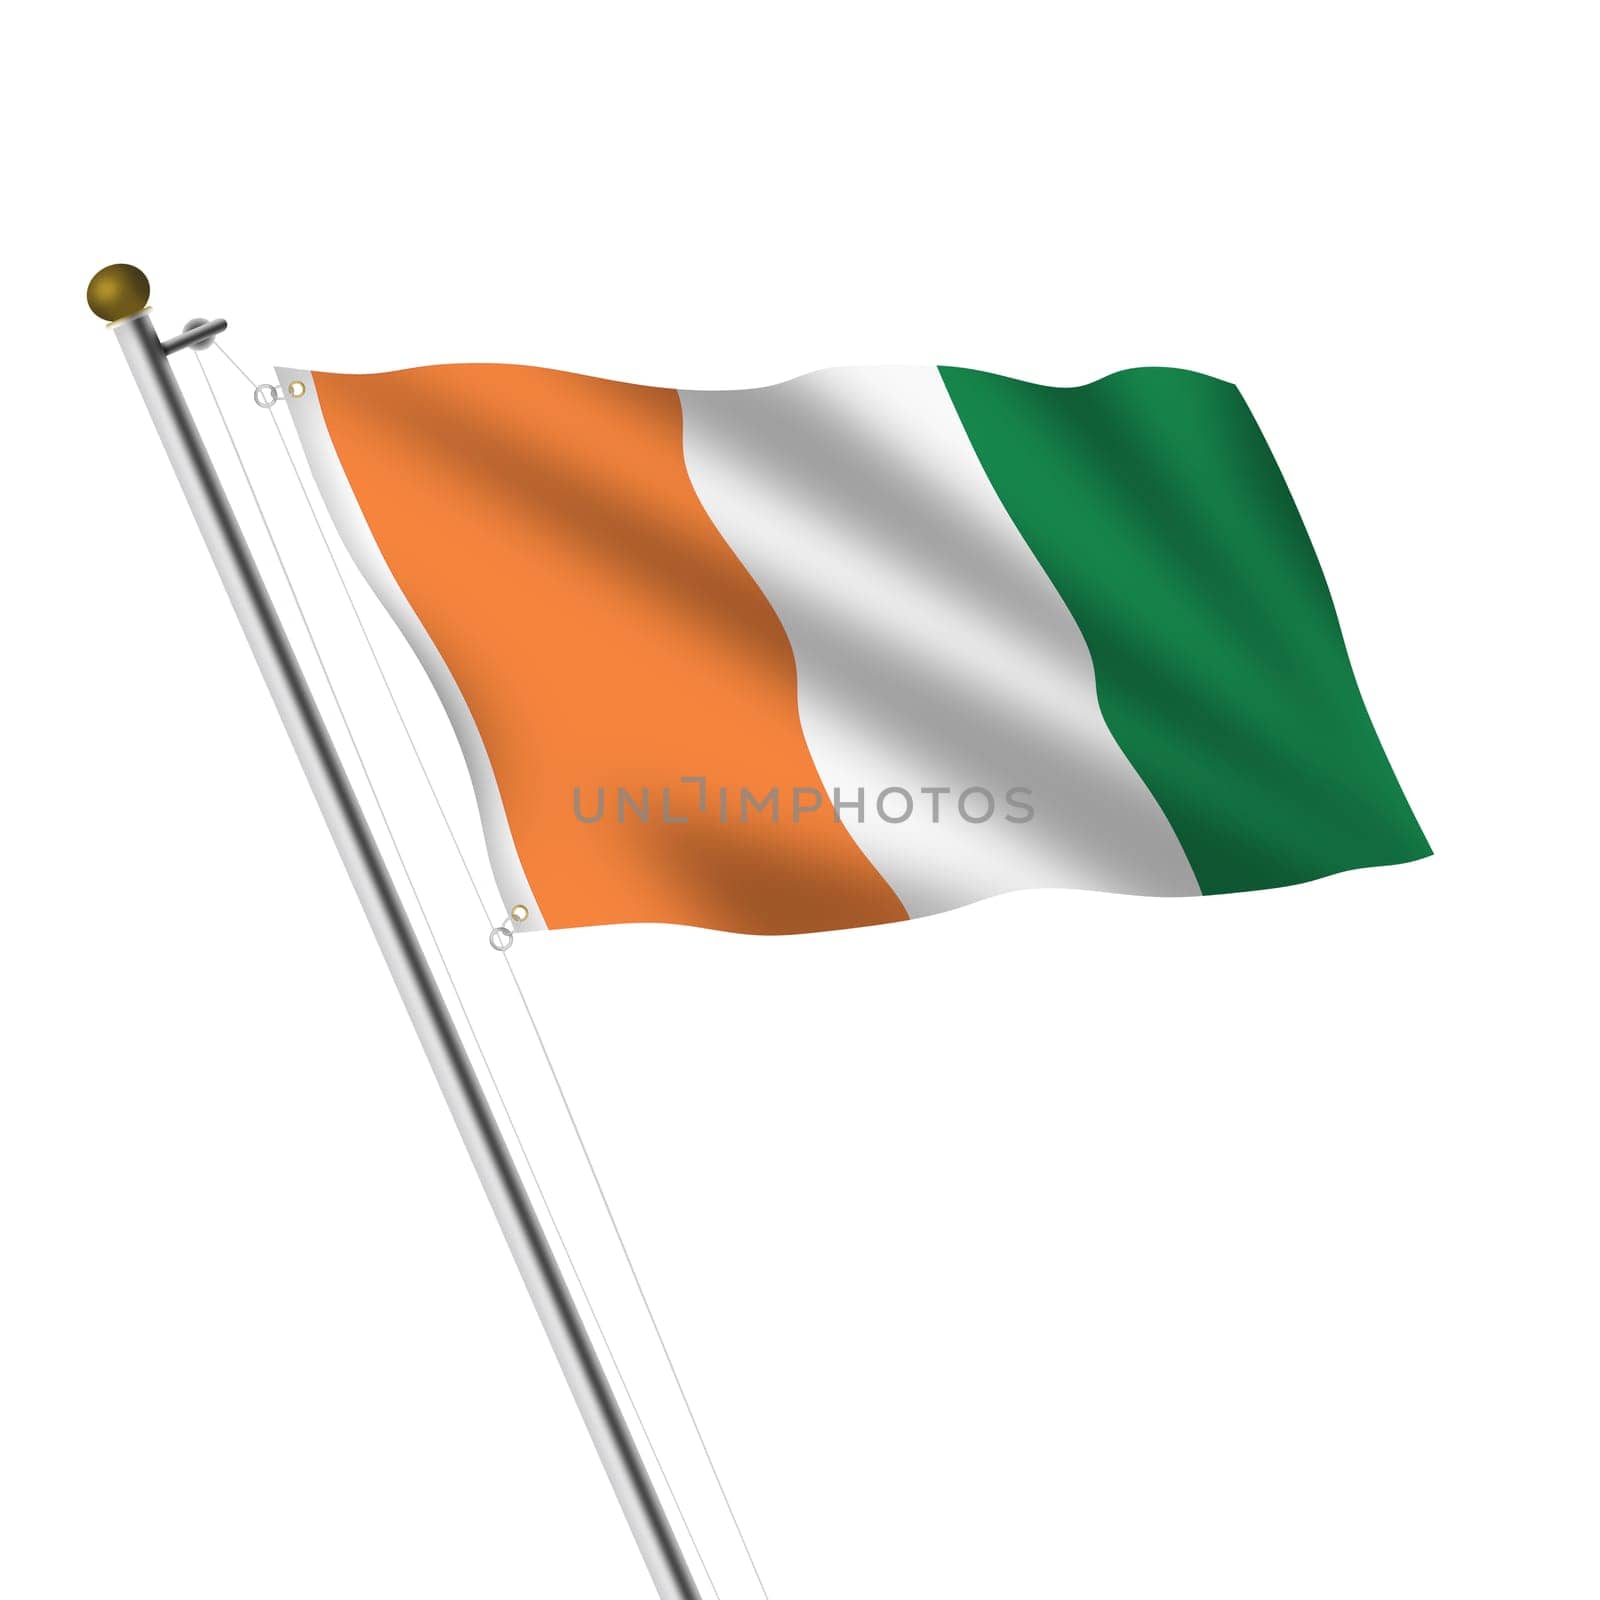 An Ivory Coast Cote Divoire Flagpole 3d illustration on white with clipping path